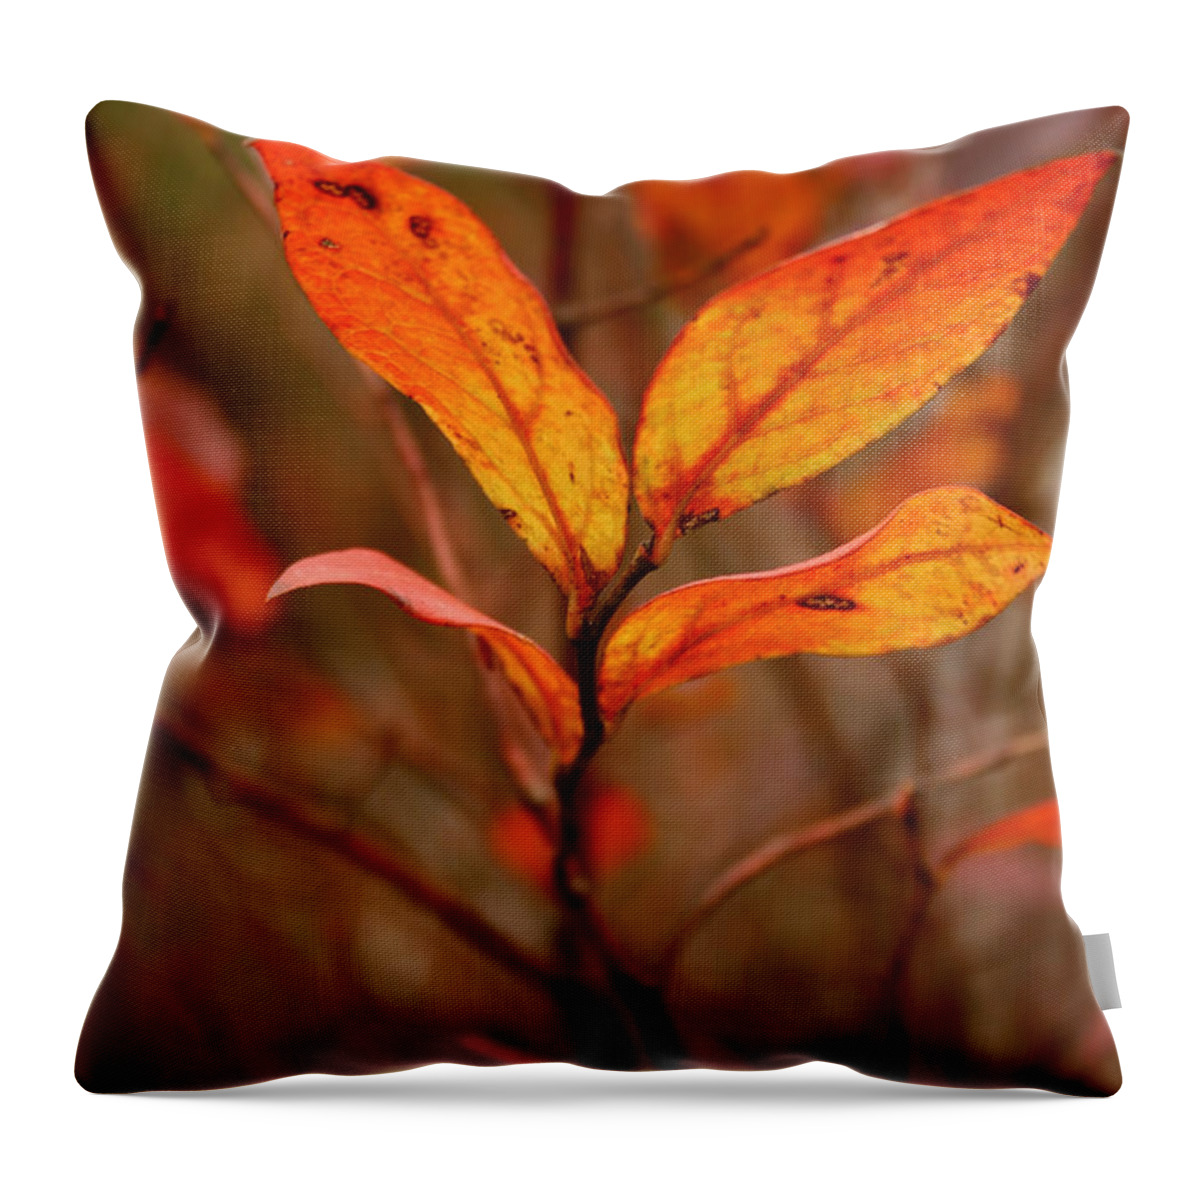 Autumn Throw Pillow featuring the photograph Colorful Leaves by Karen Harrison Brown